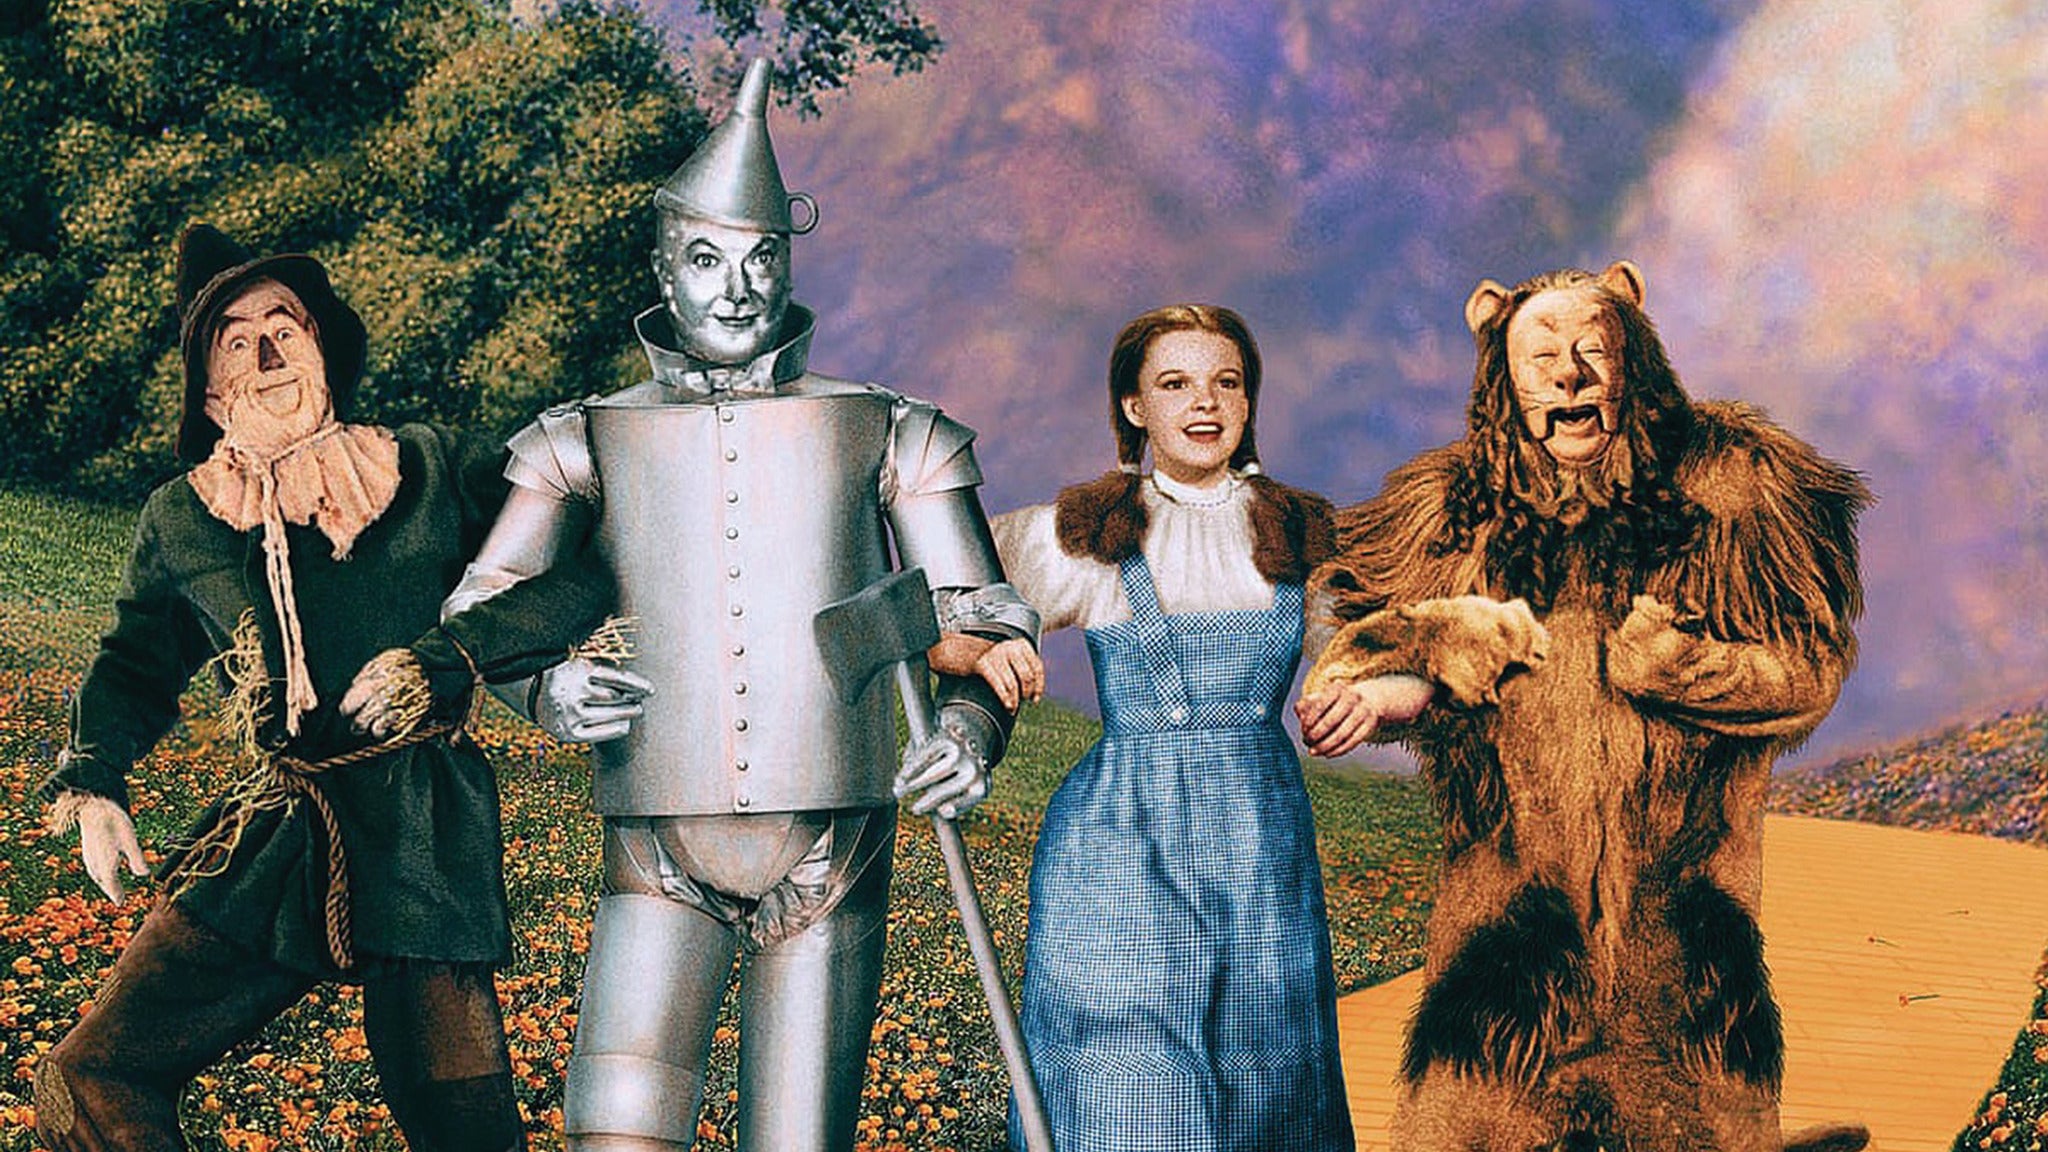 The Wizard of Oz - Kansas City 2018 in Bonner Springs promo photo for Ticketmaster presale offer code